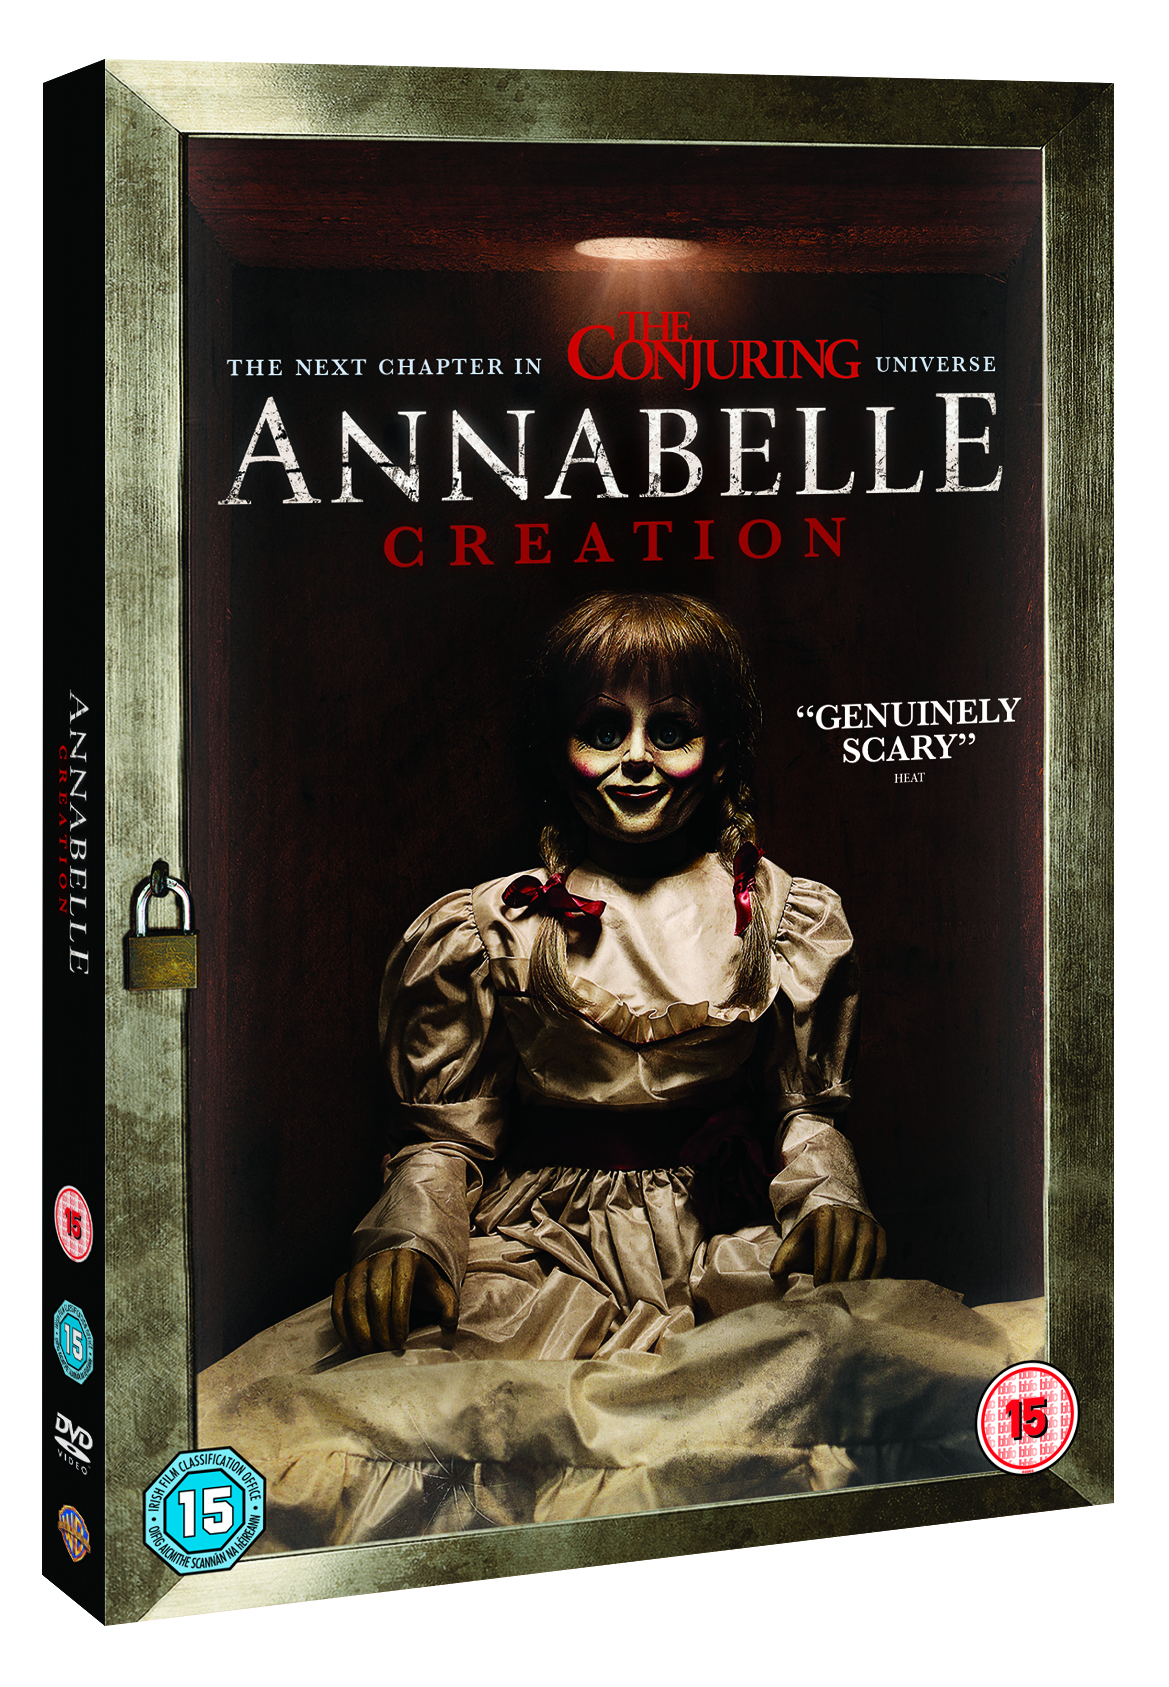 when does annabelle 2 come out on dvd